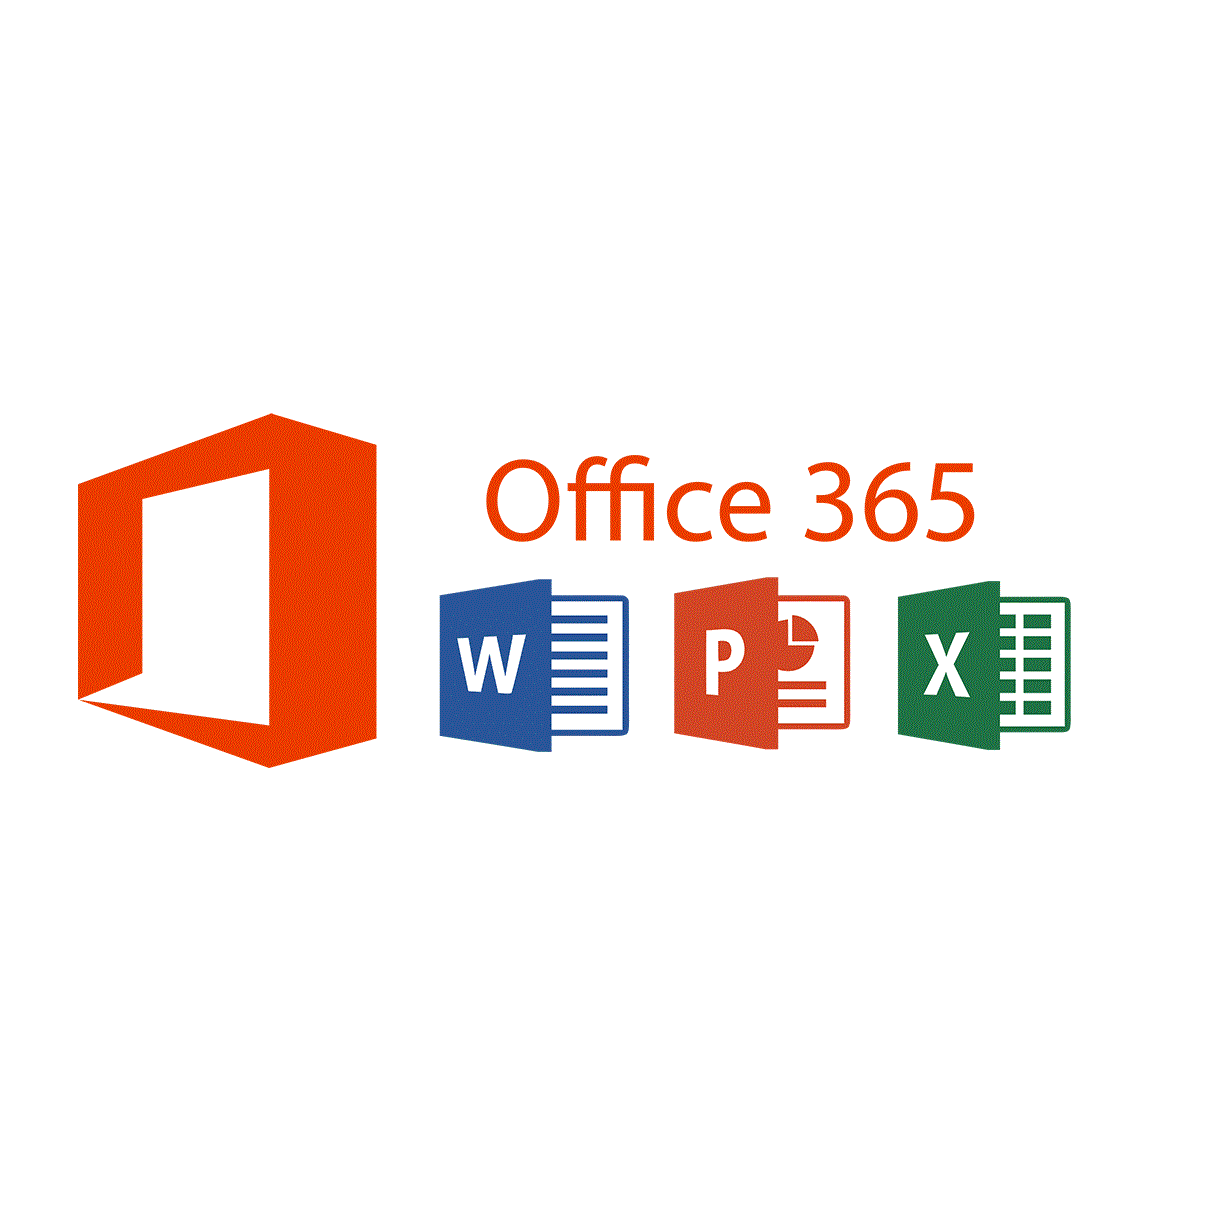 Office 365 services reach more customers from datacenters in Africa